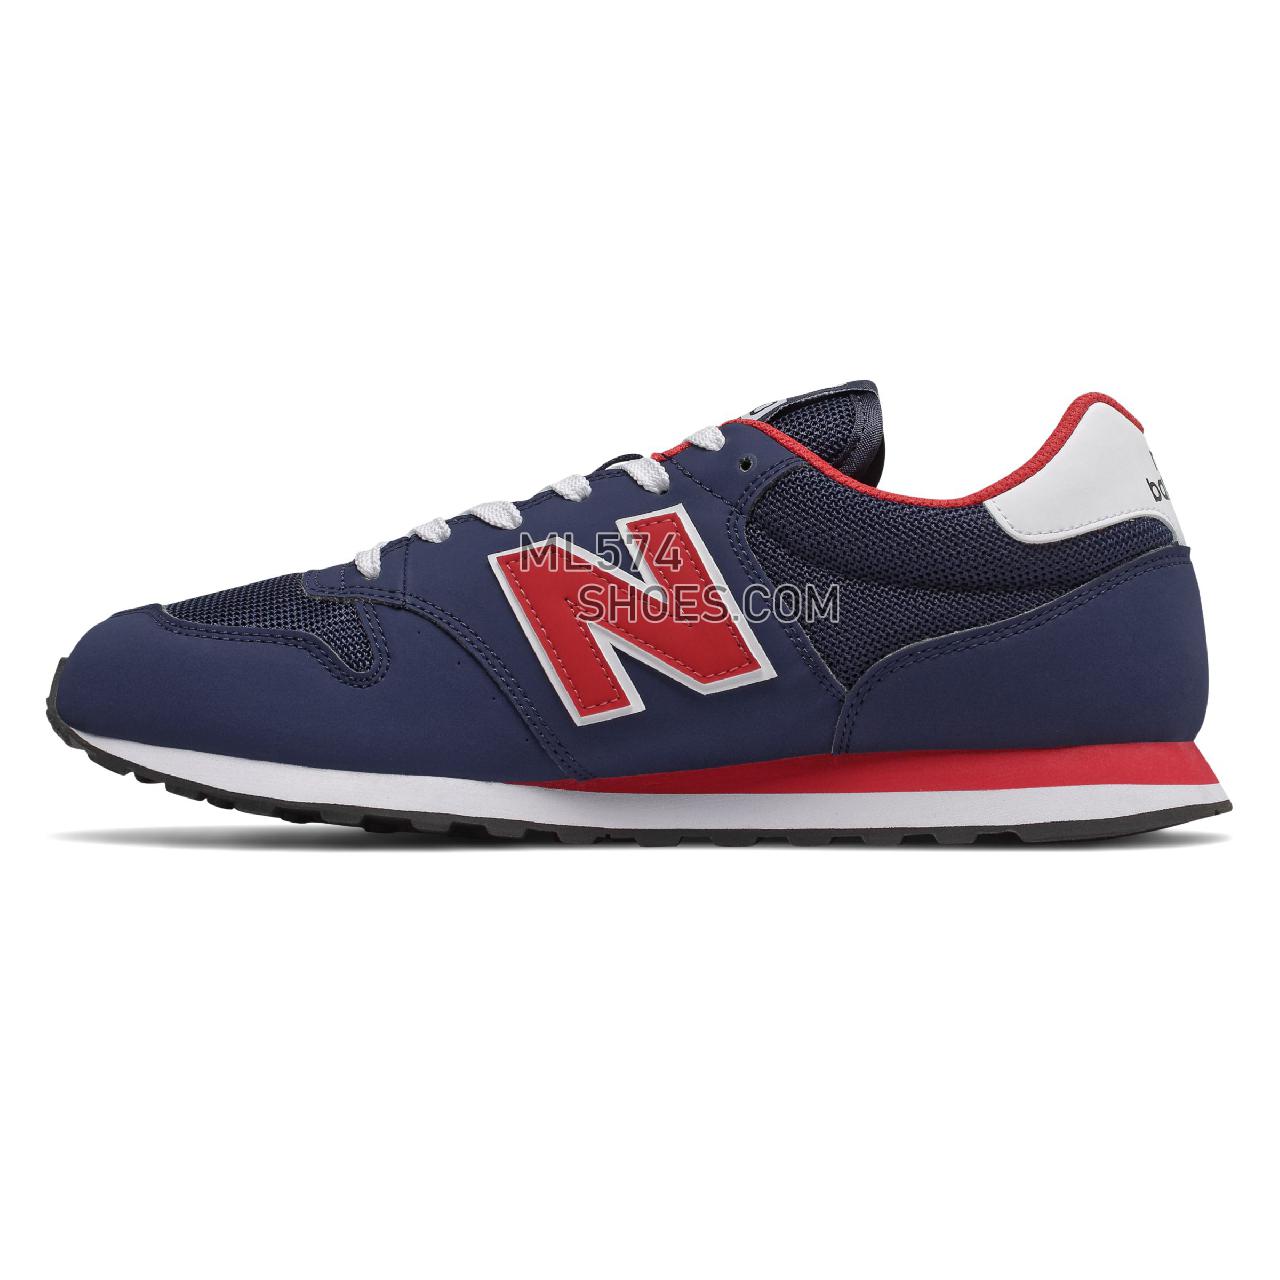 New Balance 500 Classic - Men's Classic Sneakers - Team Navy with Team Red - GM500TRT